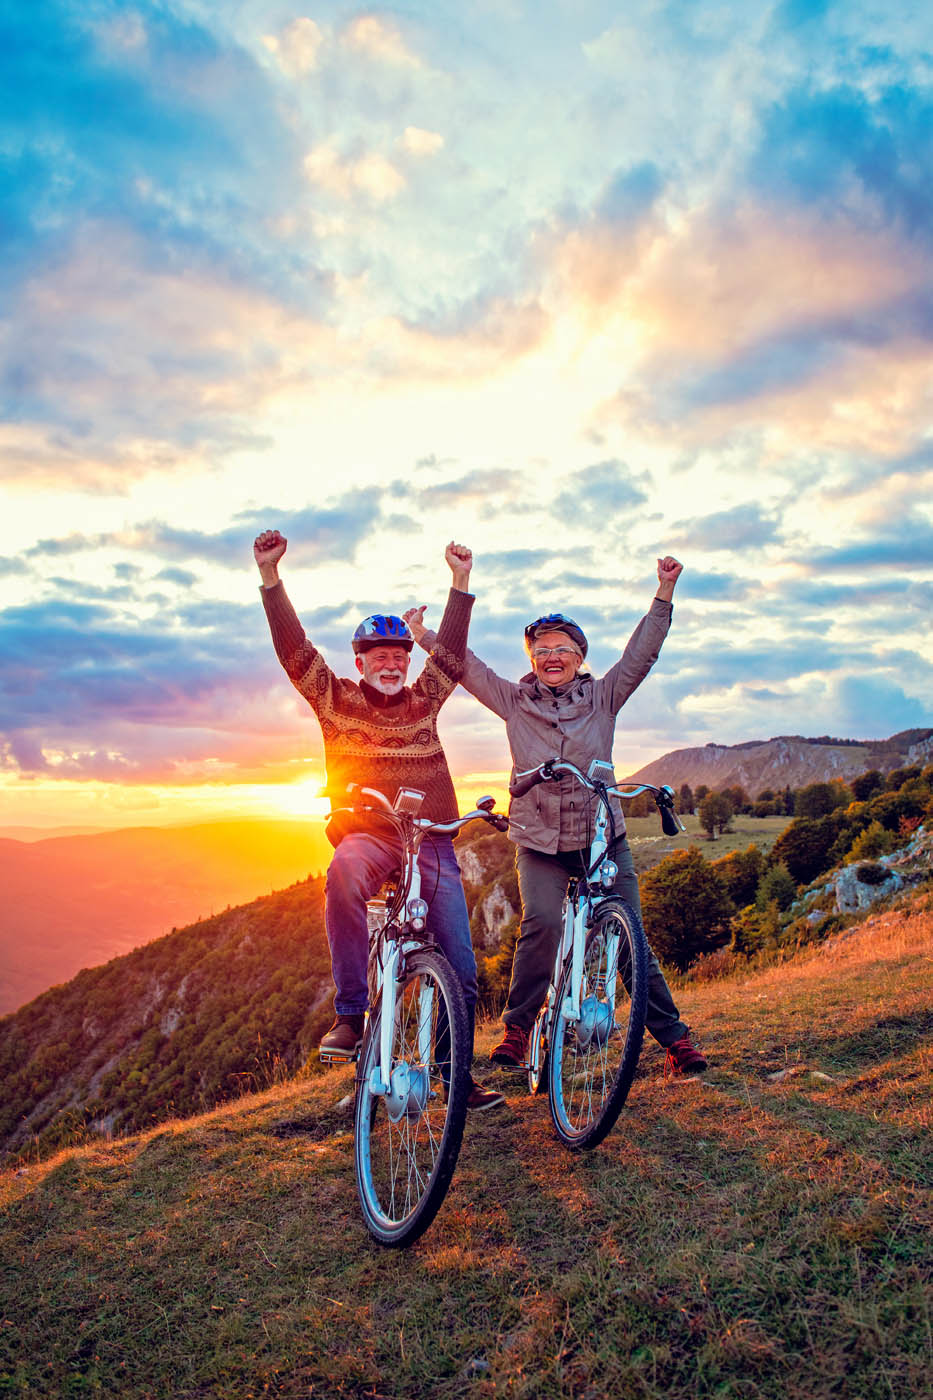 A senior couple biking pain-free into the sunset thanks to Light Lounge's knee pain treatment in your local area